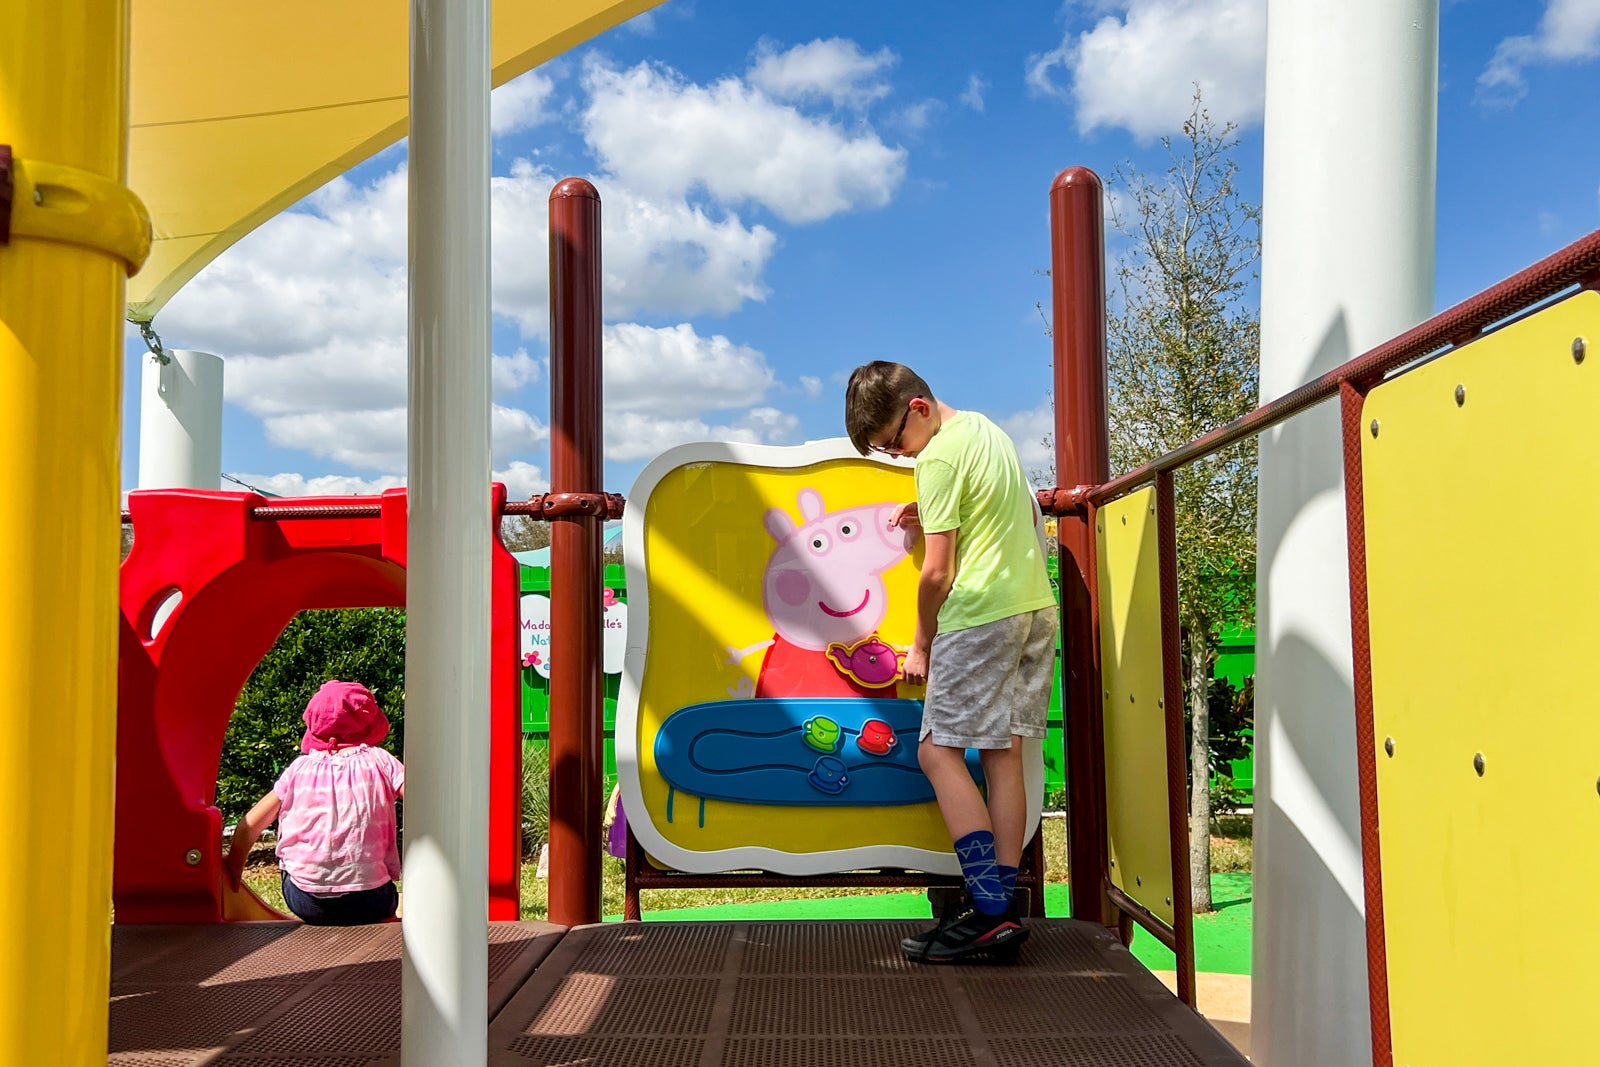 Play structure at Peppa Pig Theme Park.